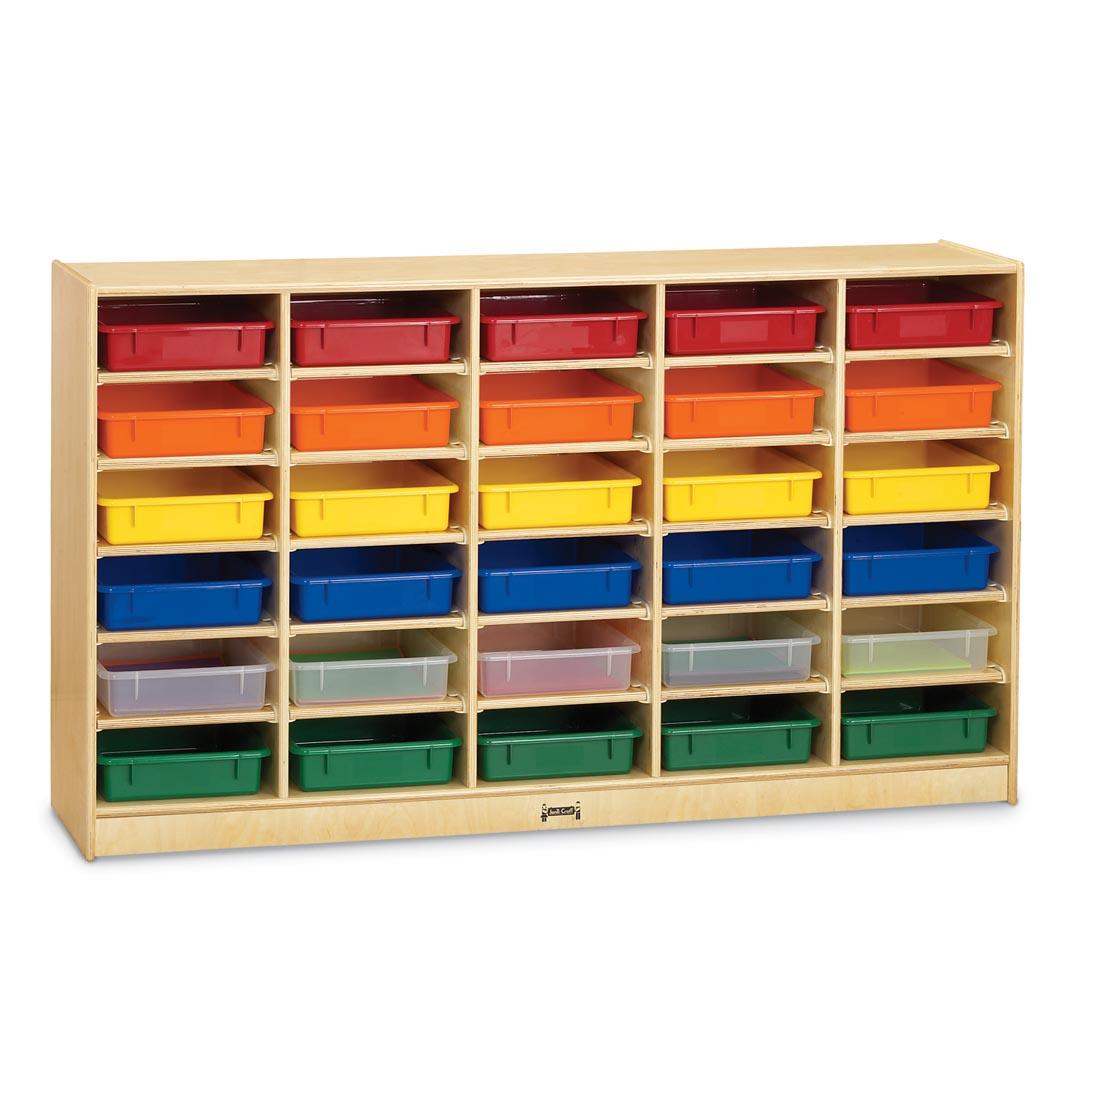 30 Paper-Tray Mobile Storage With Colored Trays